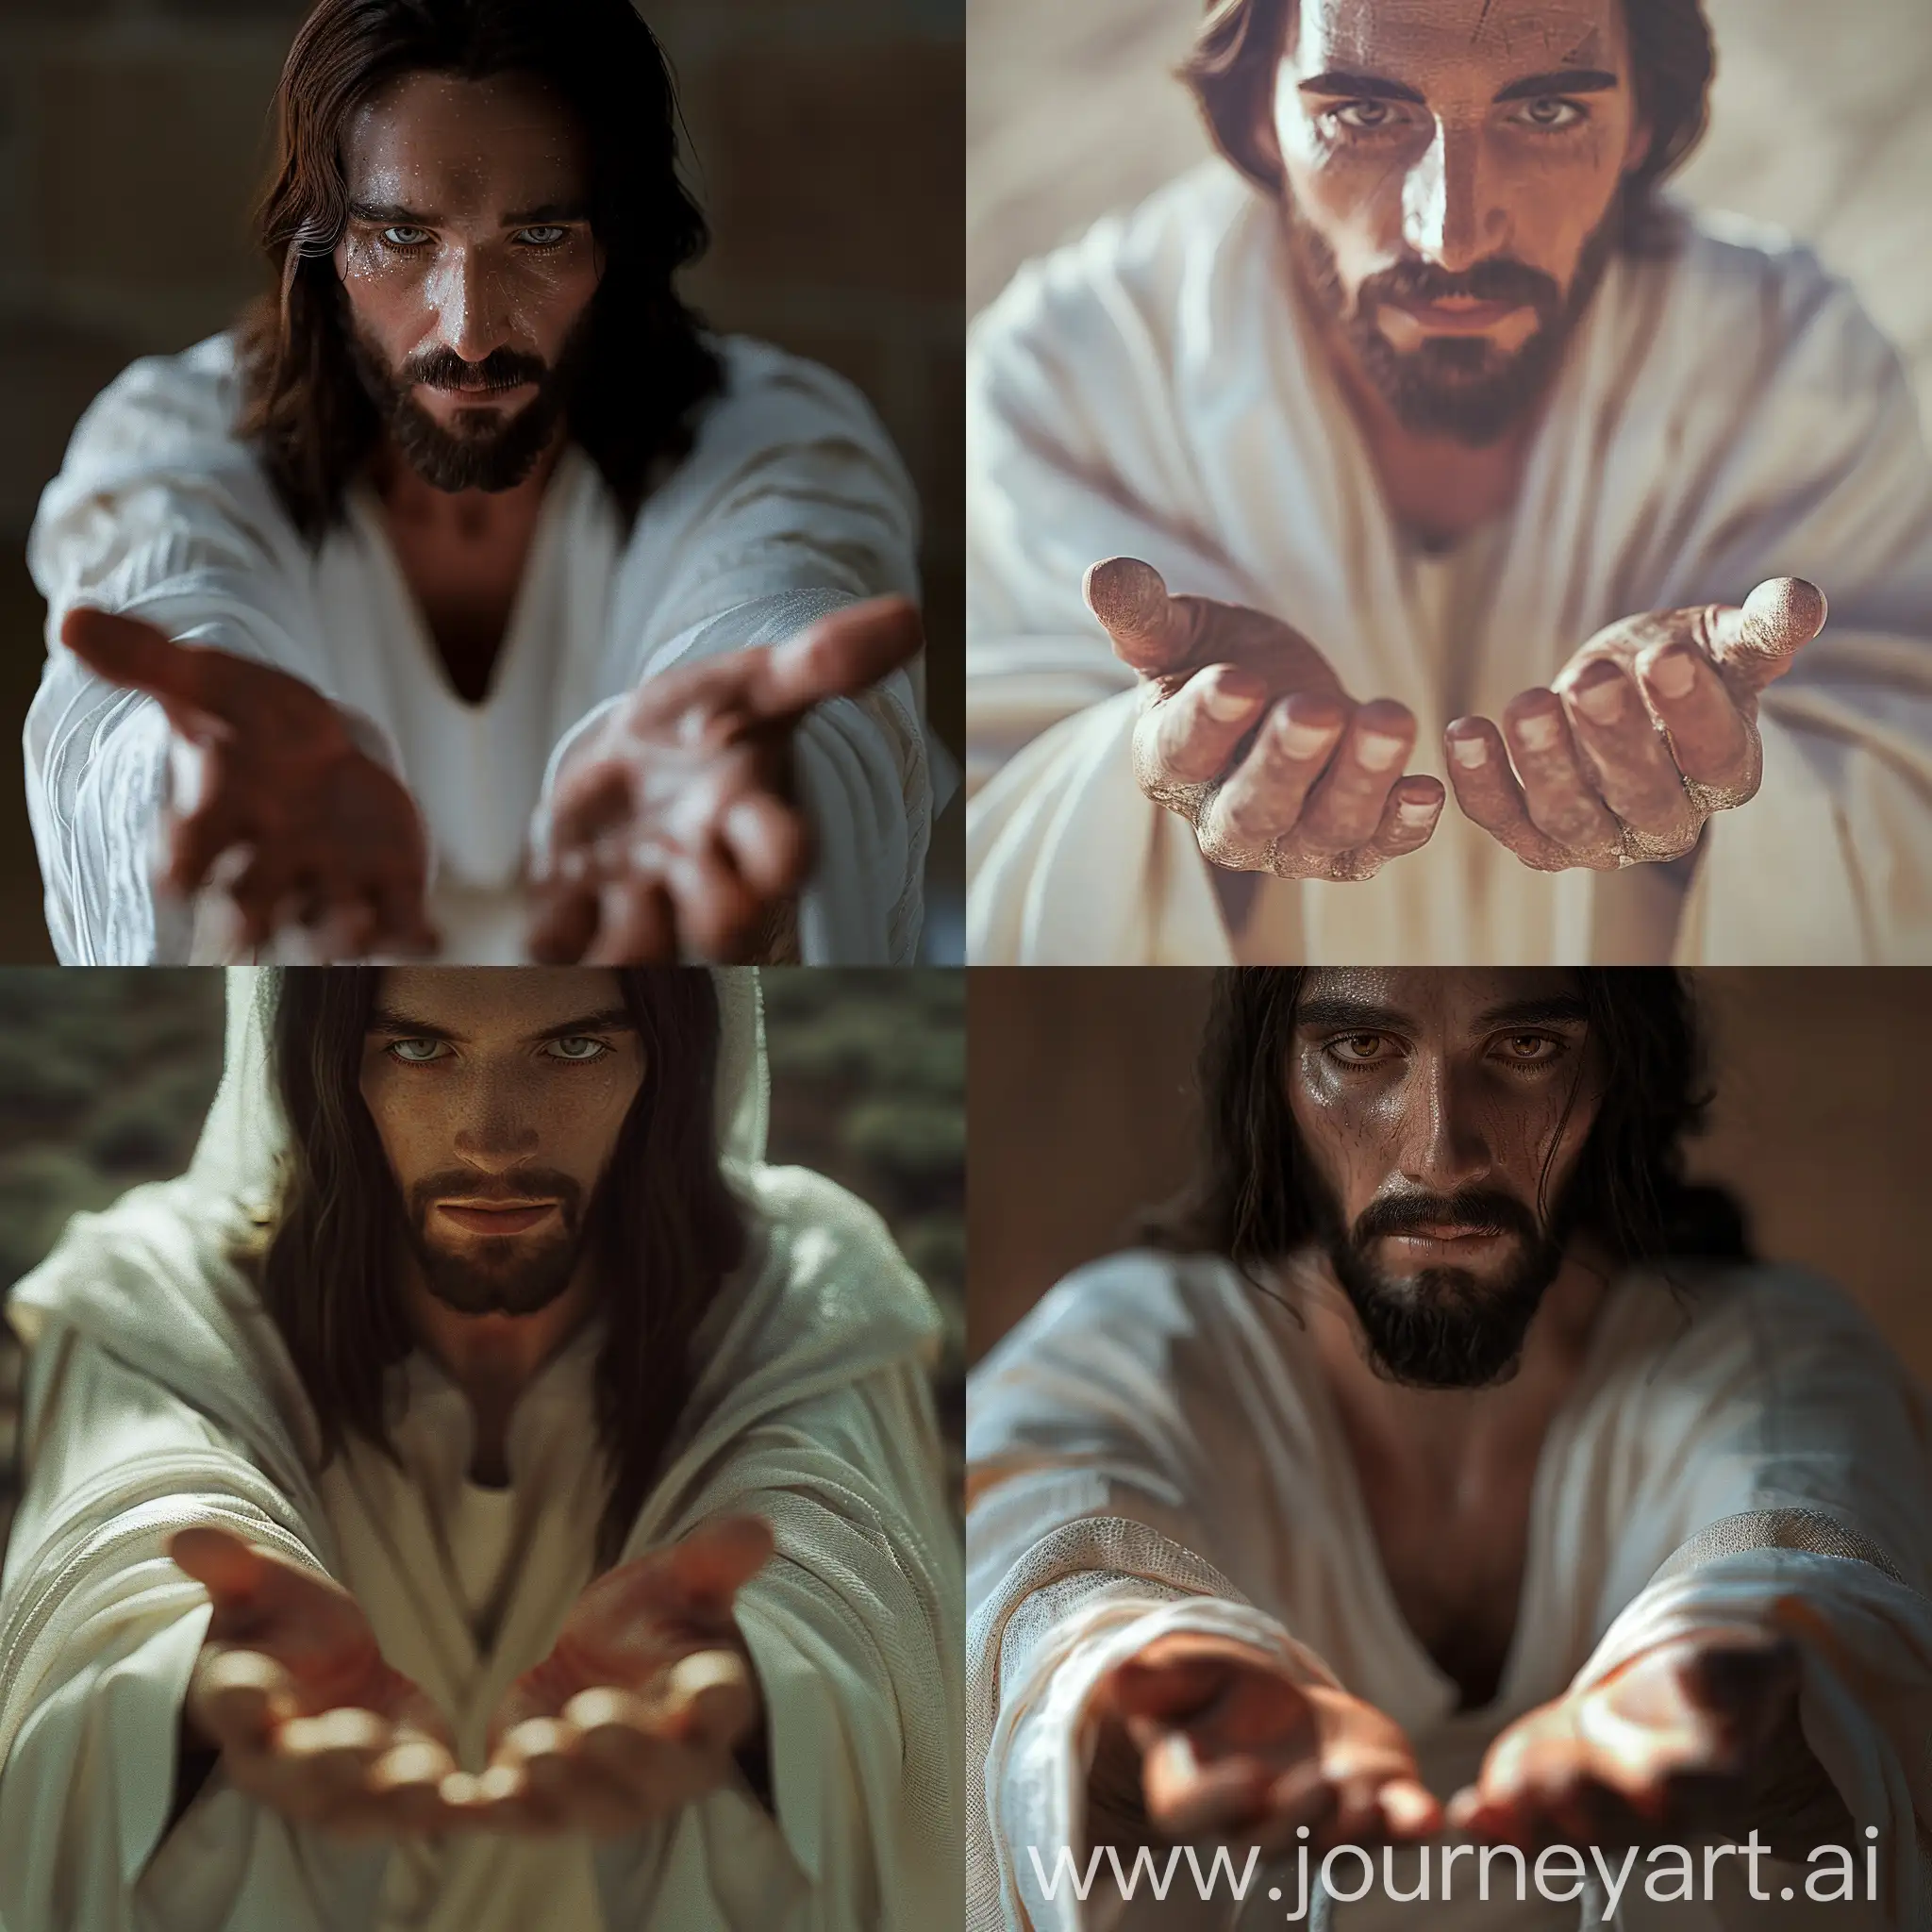 Jesus is holding out his hands, Jesus is looking directly into the camera, Jesus is standing very close, dressed in a white robe, computer graphics by Richard Hess, behance, excessivism, rtx, 4k, high resolution